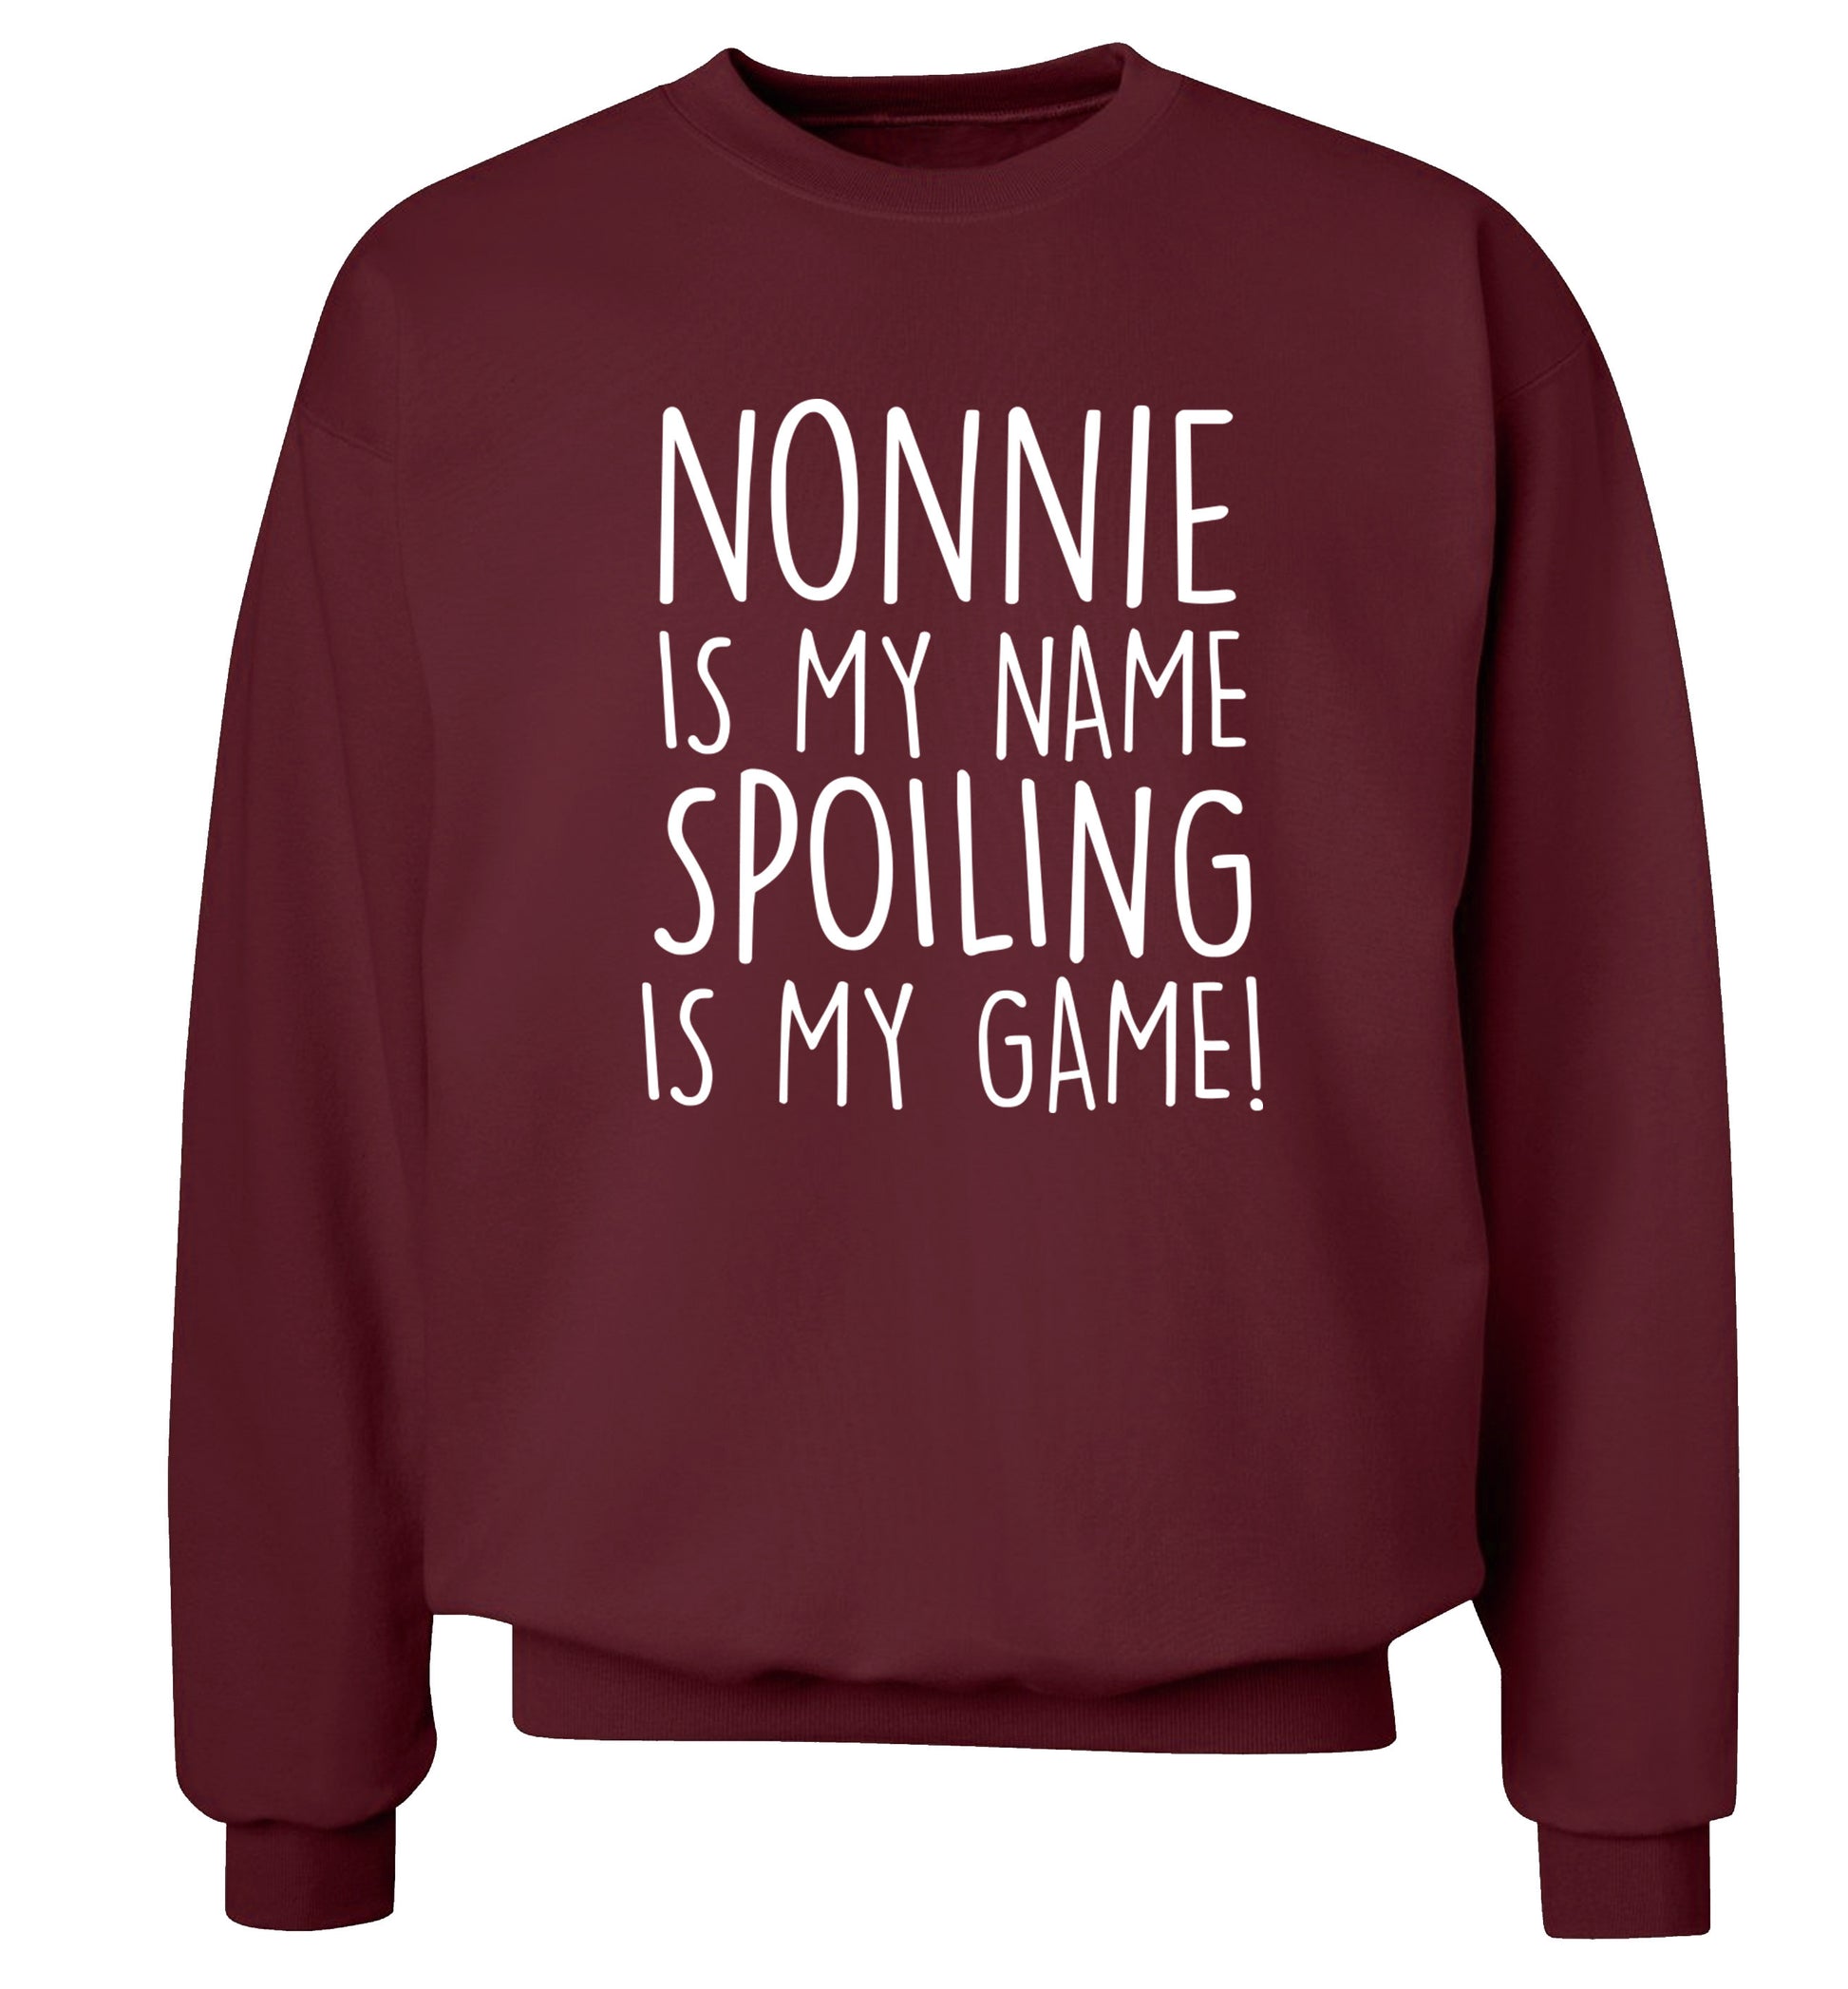 Nonnie is my name, spoiling is my game Adult's unisex maroon Sweater 2XL